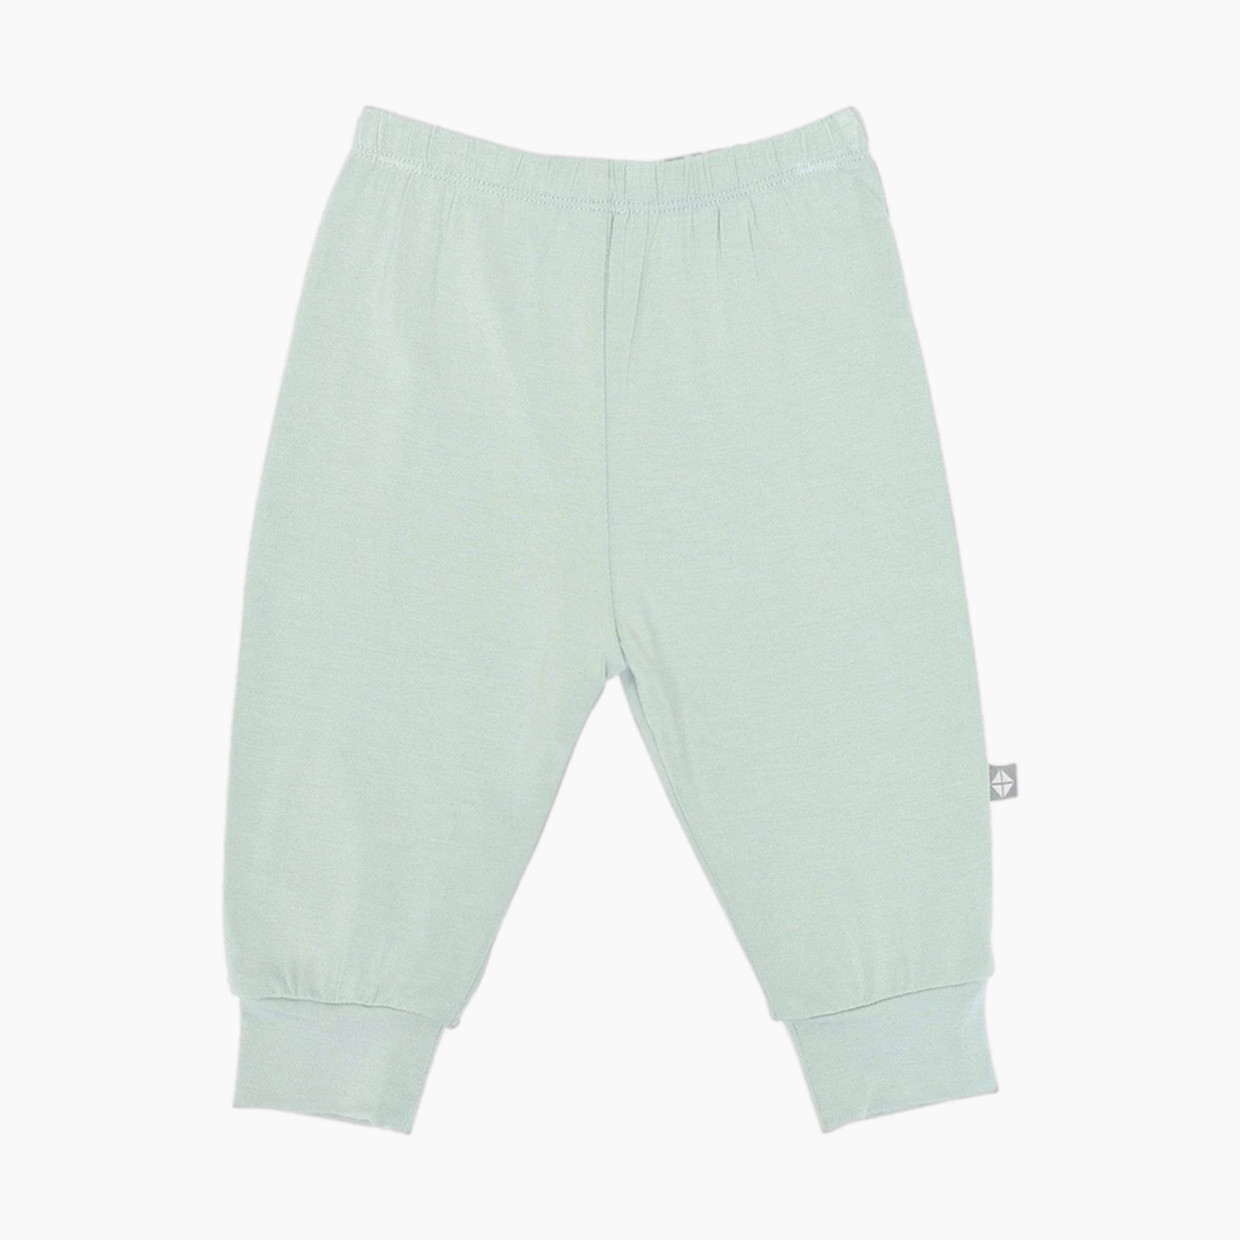 Kyte Baby Pant - Sage, 0-3 Months.